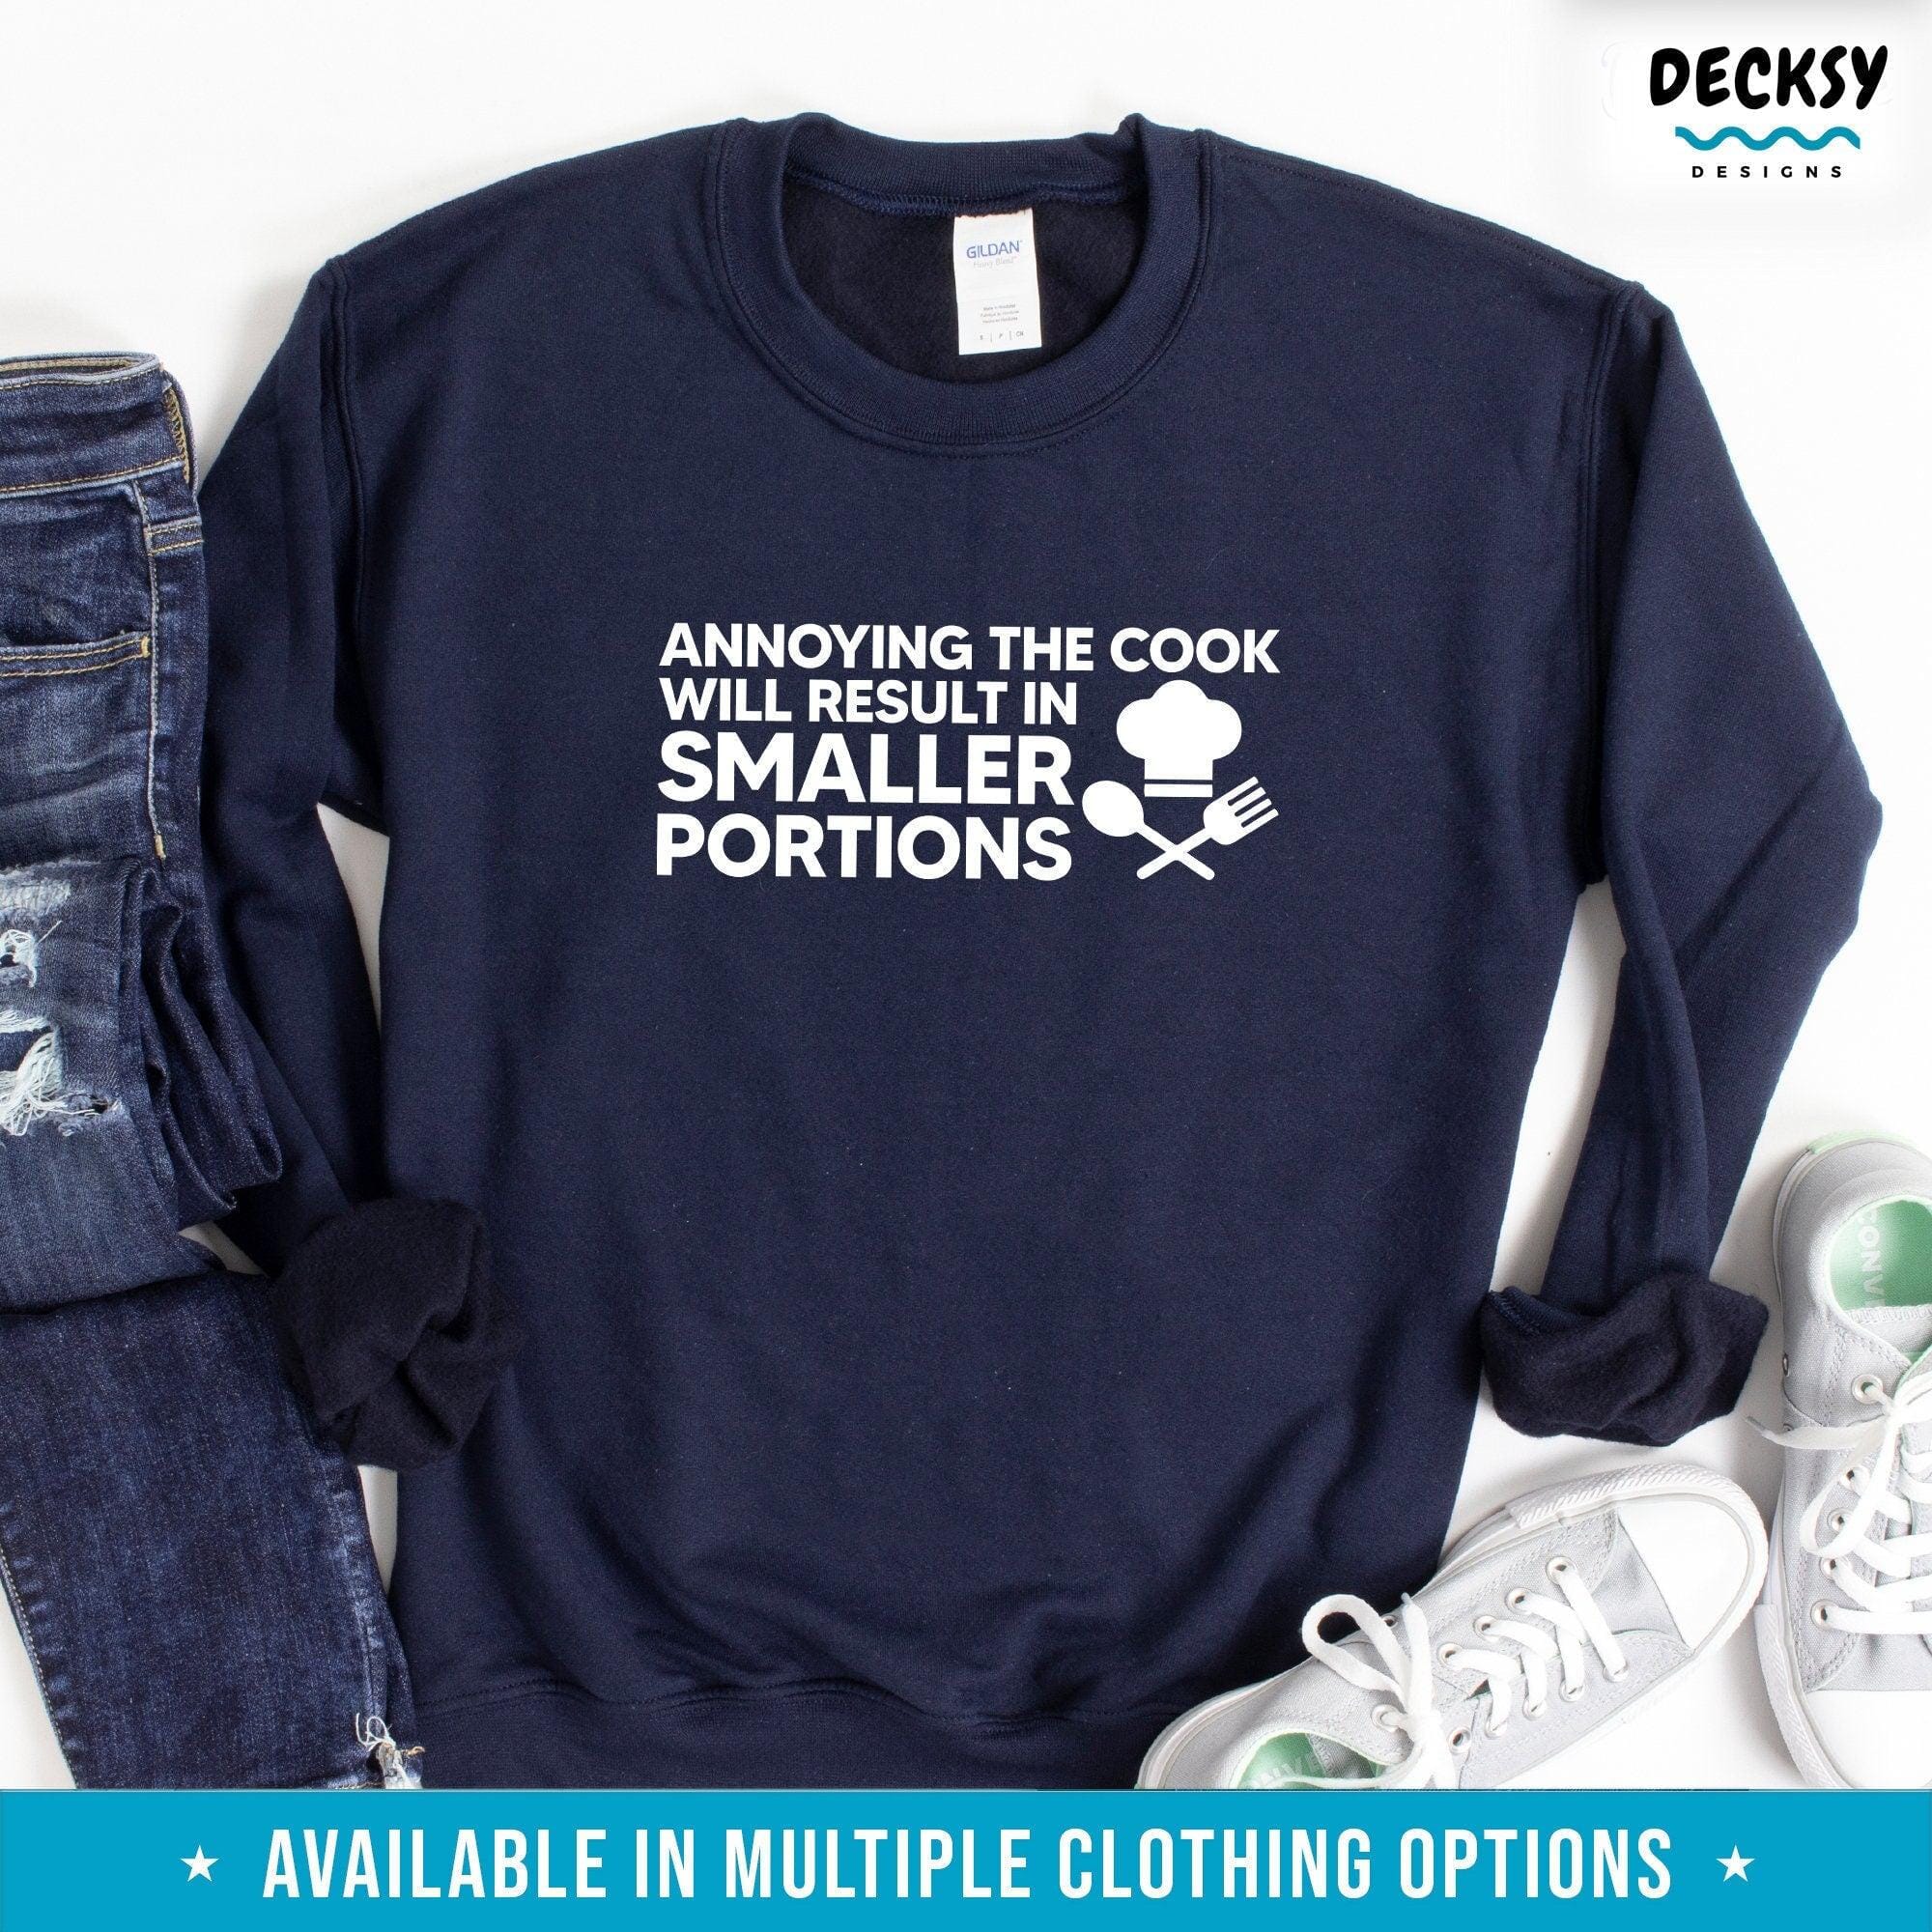 Cooking Shirt, Gift For Chef-Clothing:Gender-Neutral Adult Clothing:Tops & Tees:T-shirts:Graphic Tees-DecksyDesigns